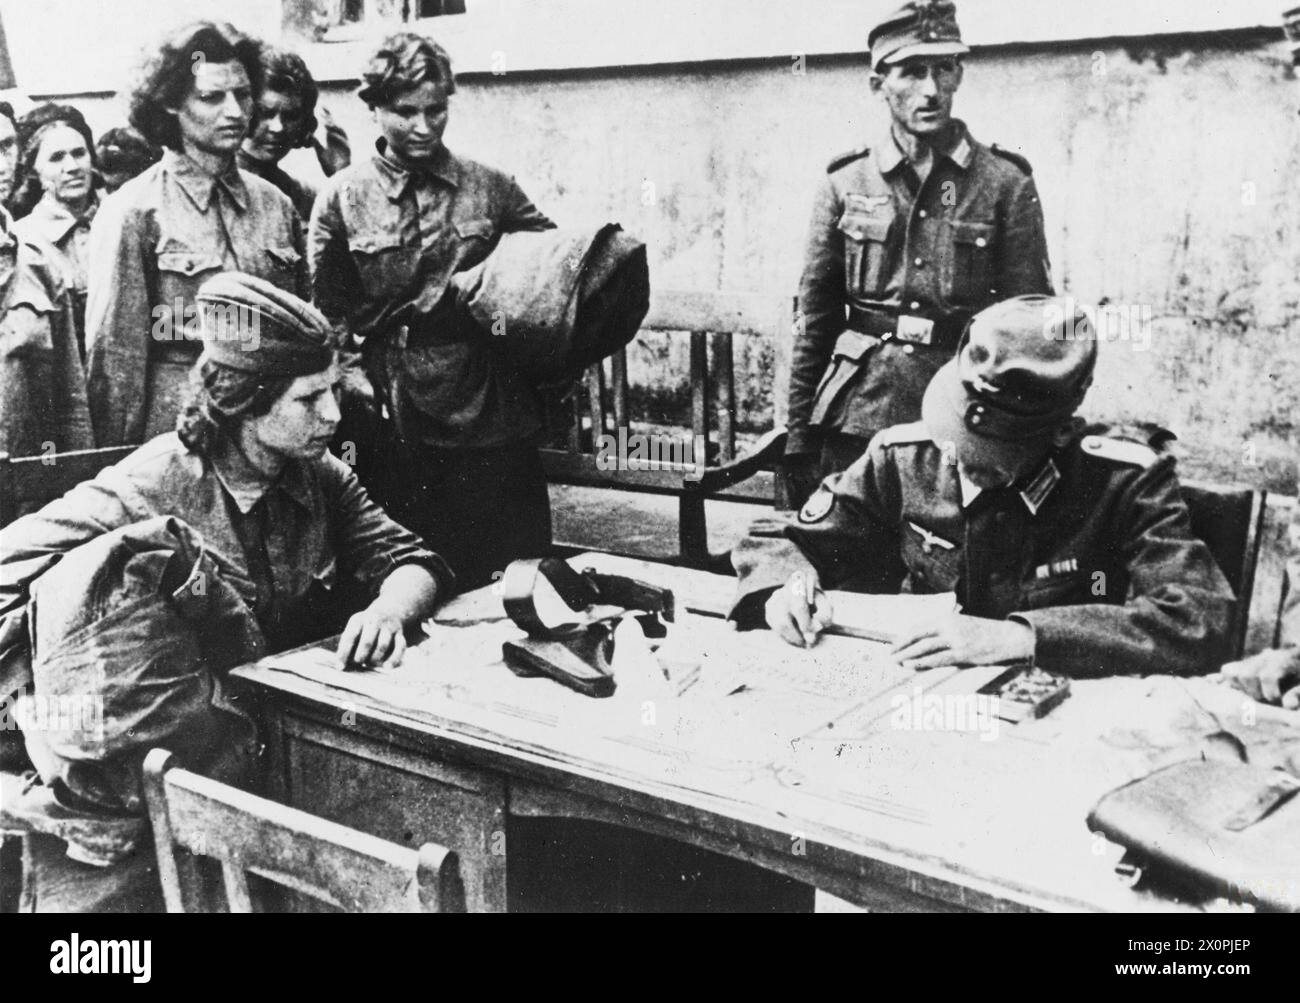 THE GERMAN ARMY ON THE EASTERN FRONT, 1941-1945 - Soviet female prisoners being questioned by German soldiers after being captured on the Eastern Front Red Army, German Army Stock Photo